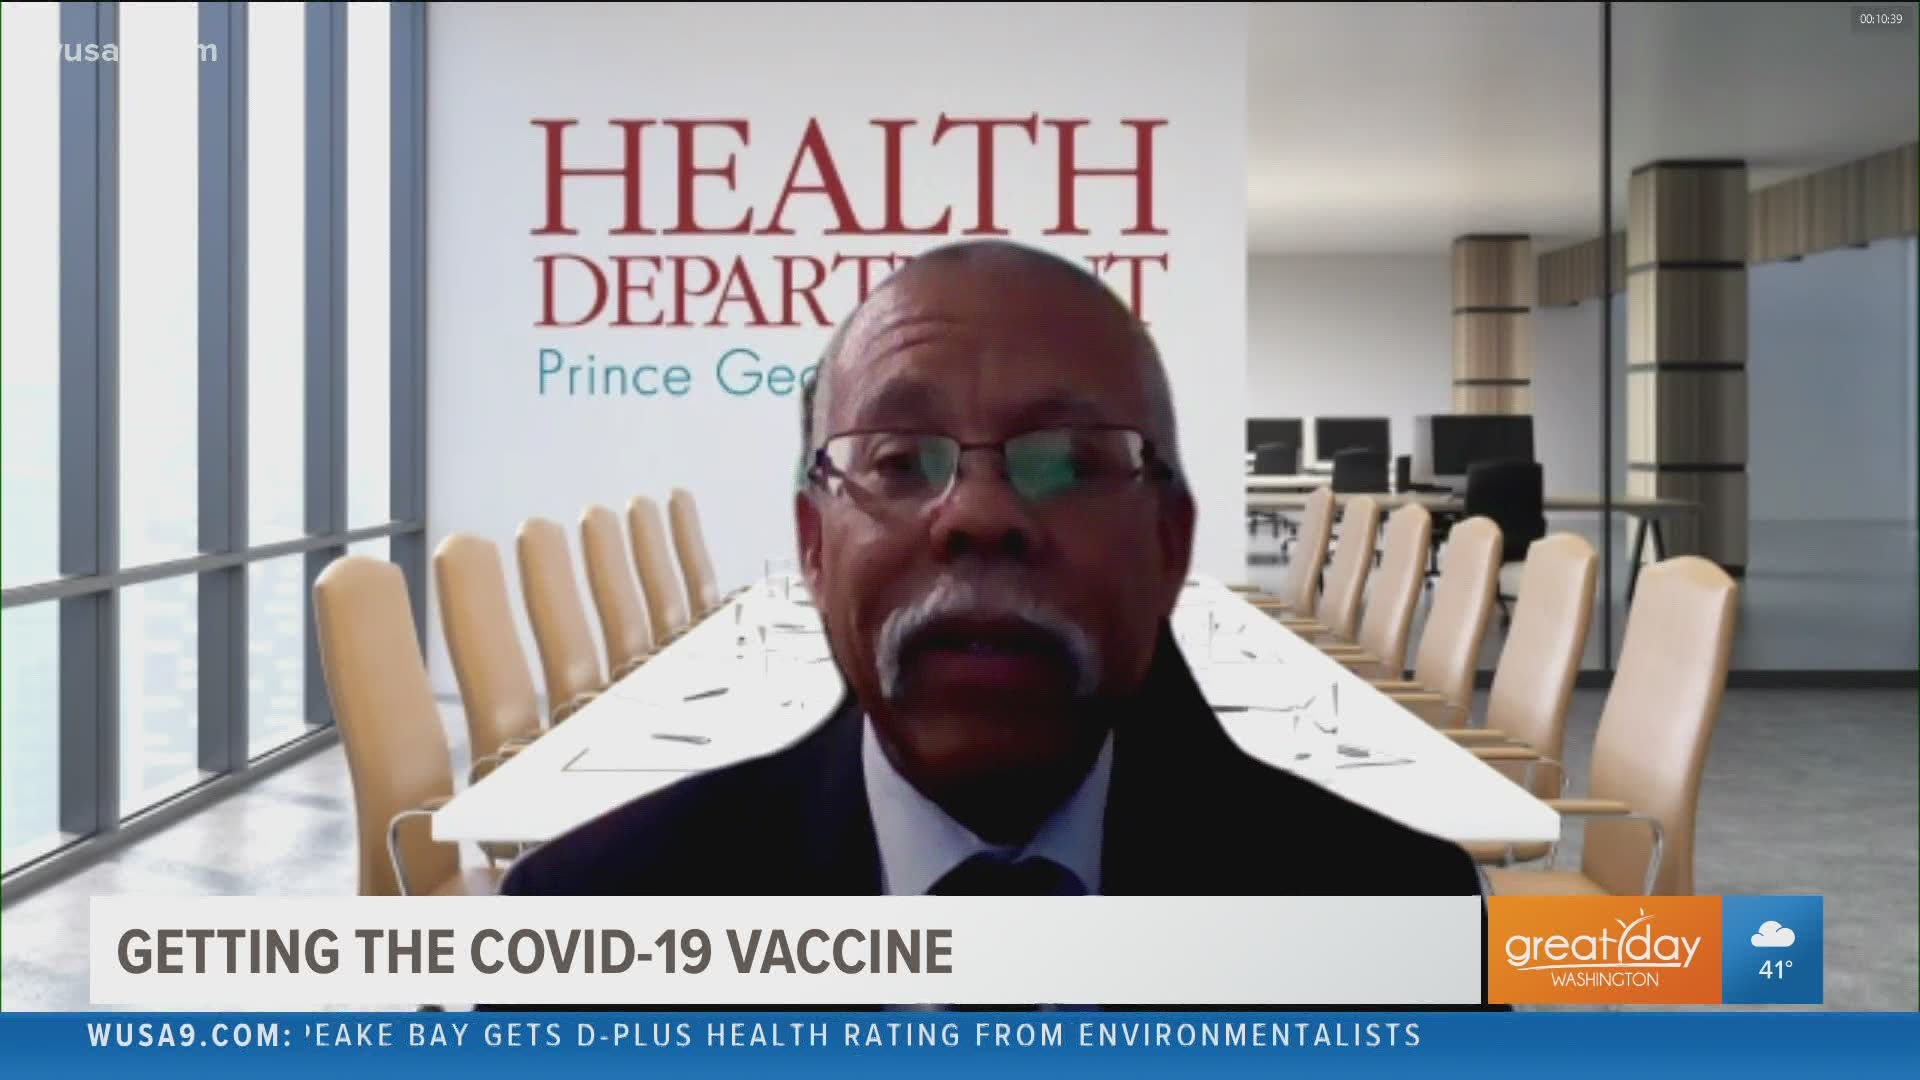 Dr. Ernest Carter explains why everyone should make plans to get a COVID-19 vaccine when they become available. Sponsored by Prince George's Department of Health.